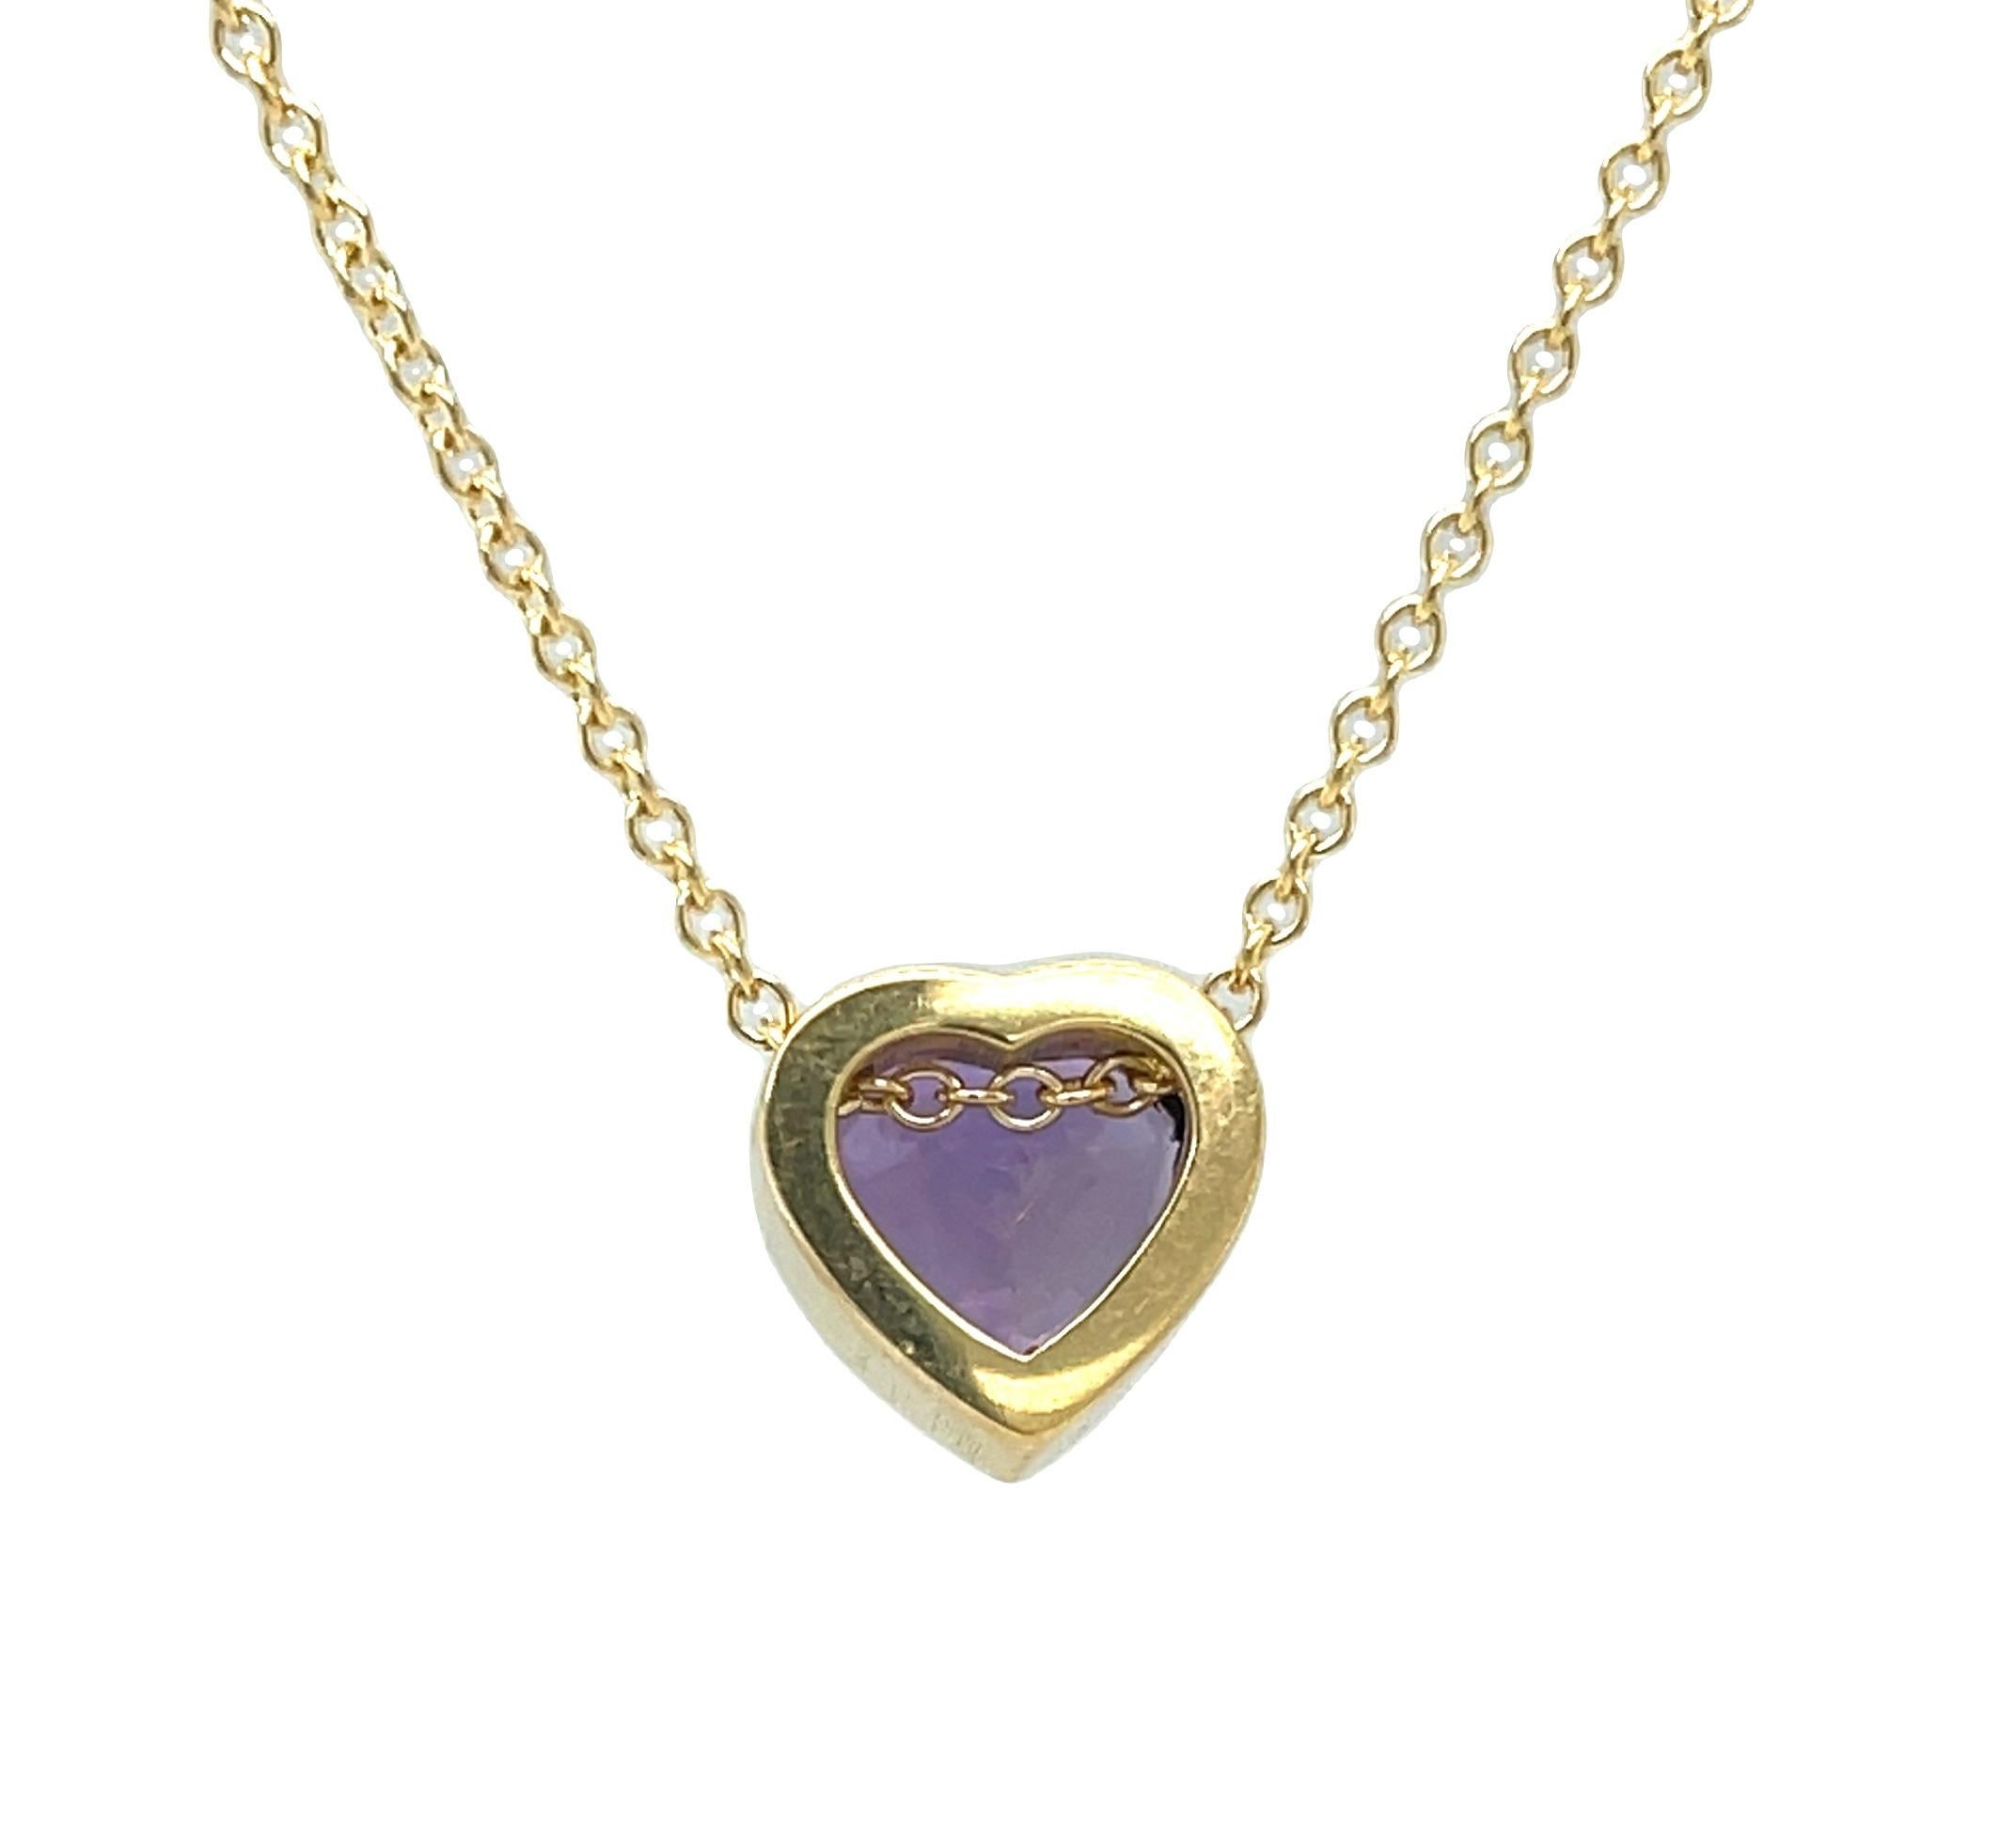 Heart Cut GIA Certified Unheated 3.56 Carat Purple Sapphire Heart Necklace in 18k Gold For Sale